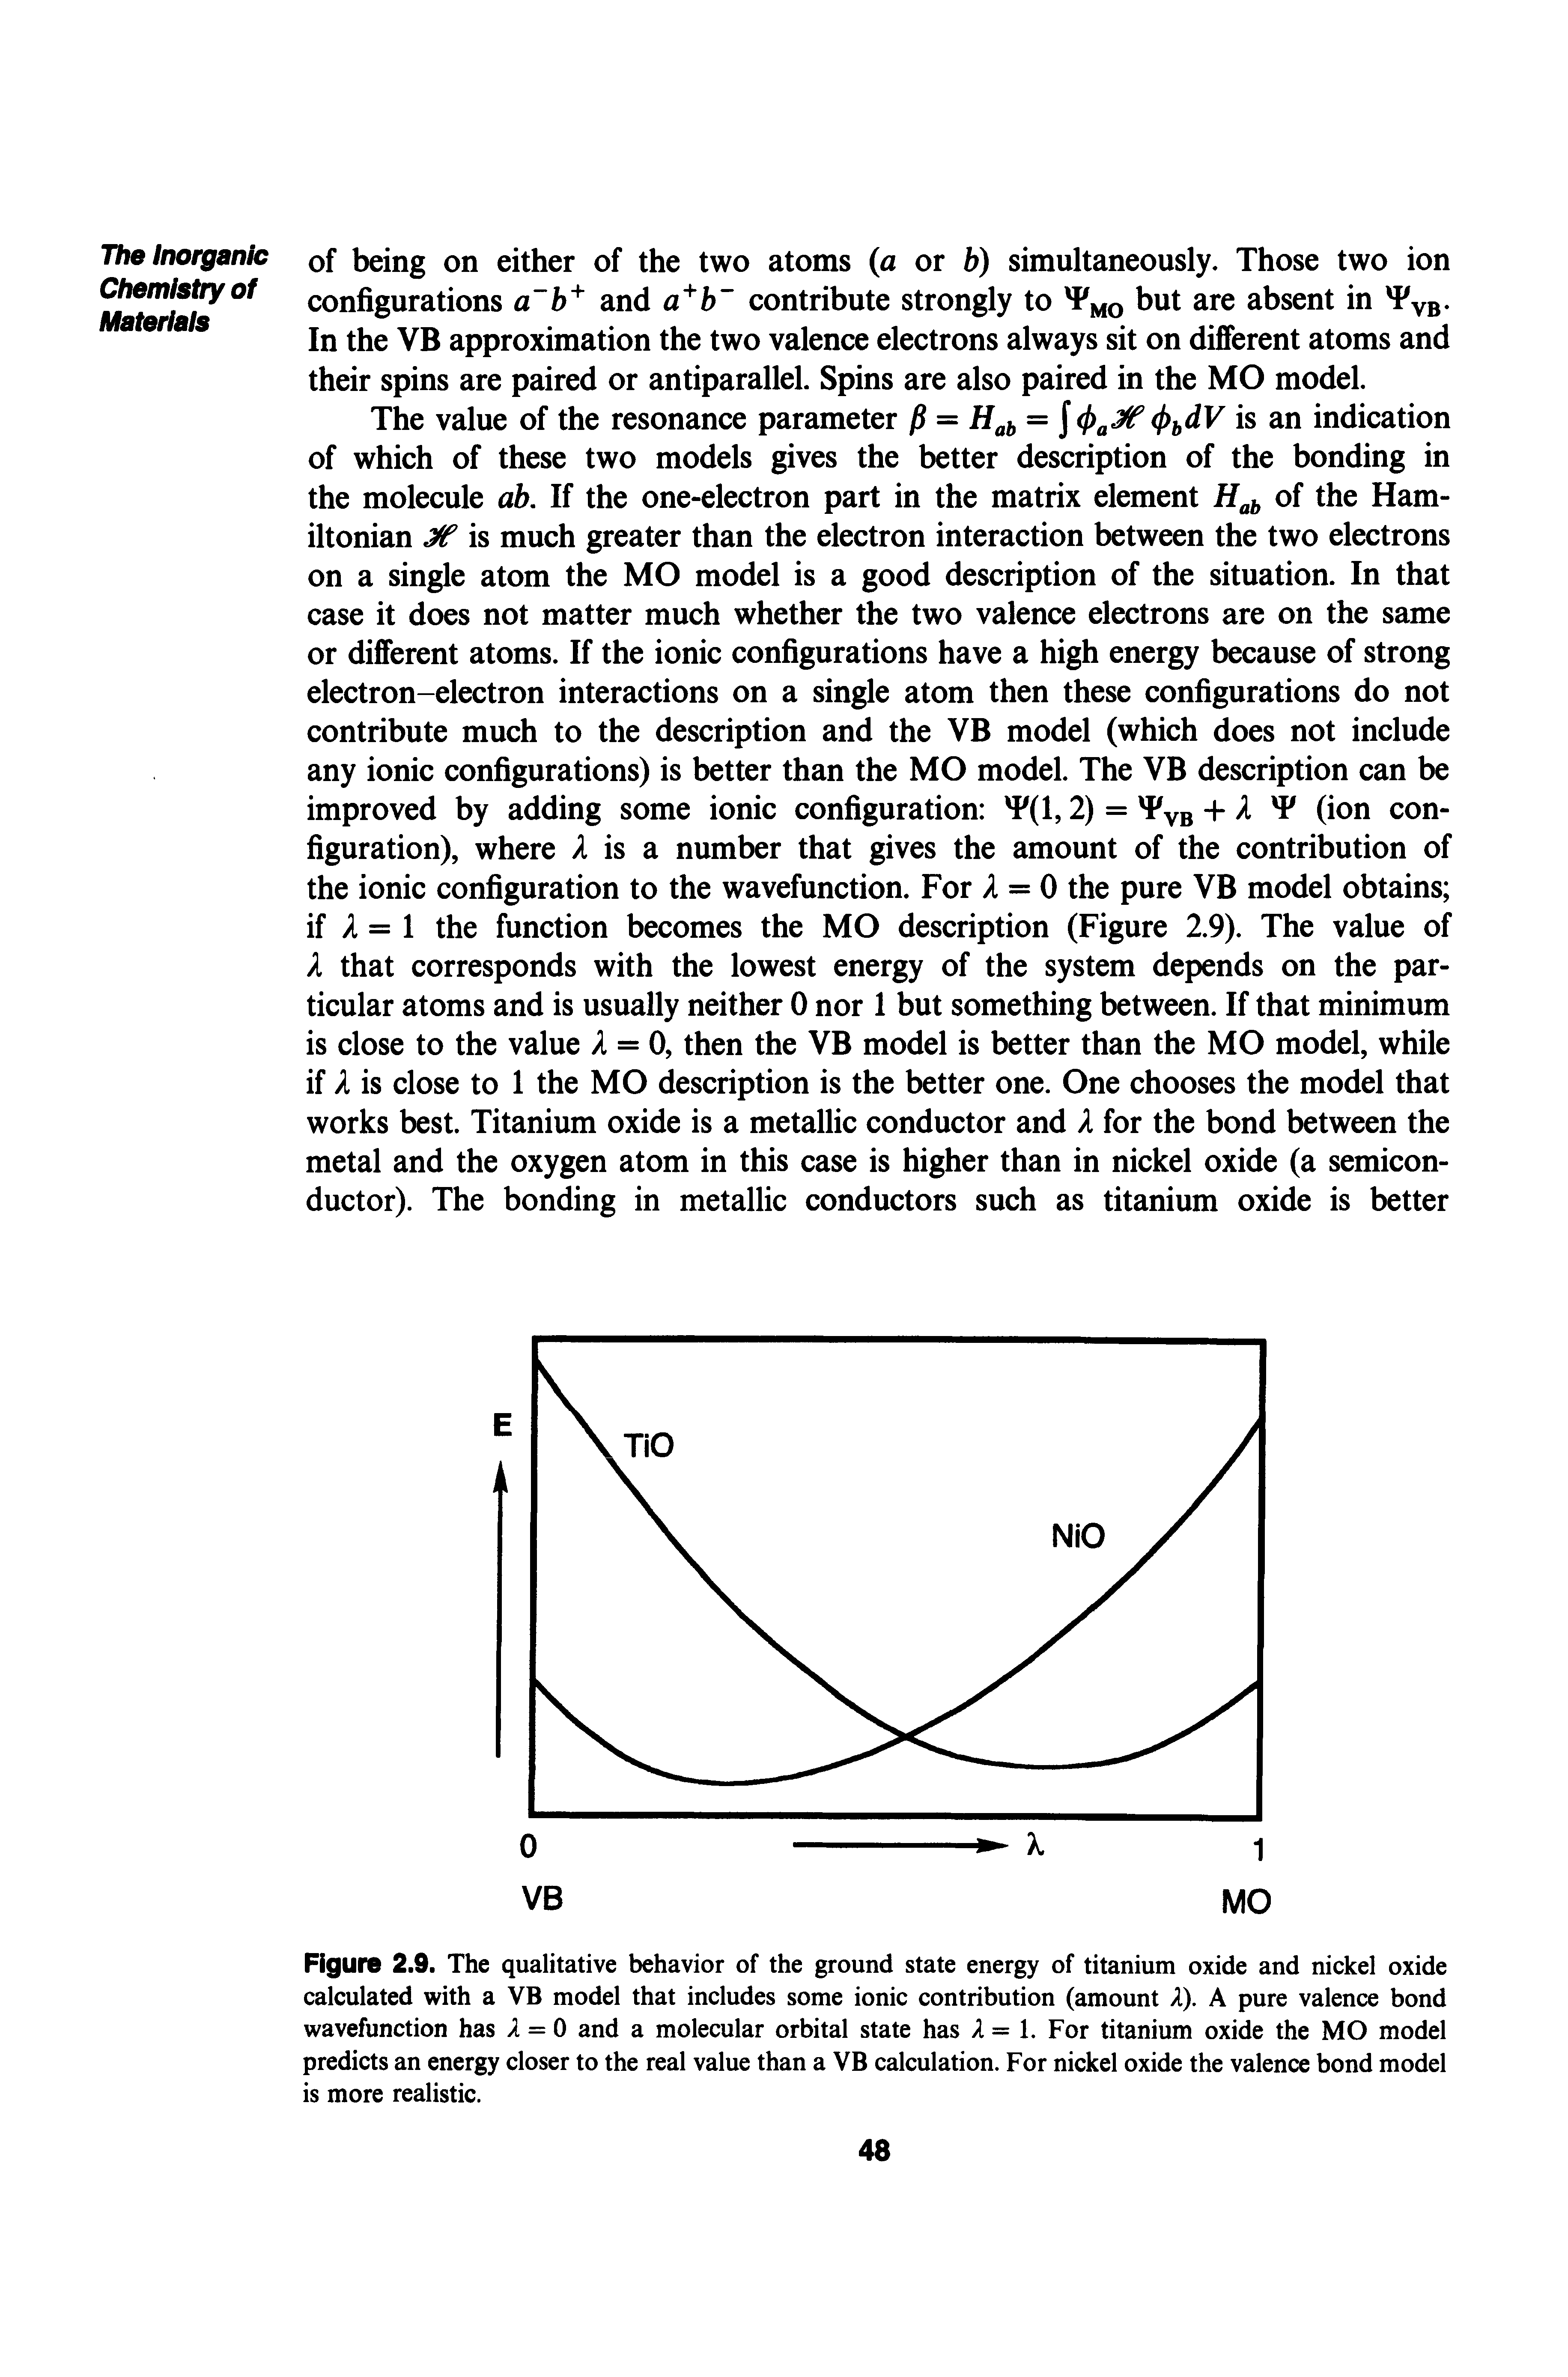 Figure 2.9. The qualitative behavior of the ground state energy of titanium oxide and nickel oxide calculated with a VB model that includes some ionic contribution (amount X). A pure valence bond wavefunction has = 0 and a molecular orbital state has A = 1. For titanium oxide the MO model predicts an energy closer to the real value than a VB calculation. For nickel oxide the valence bond model is more realistic.